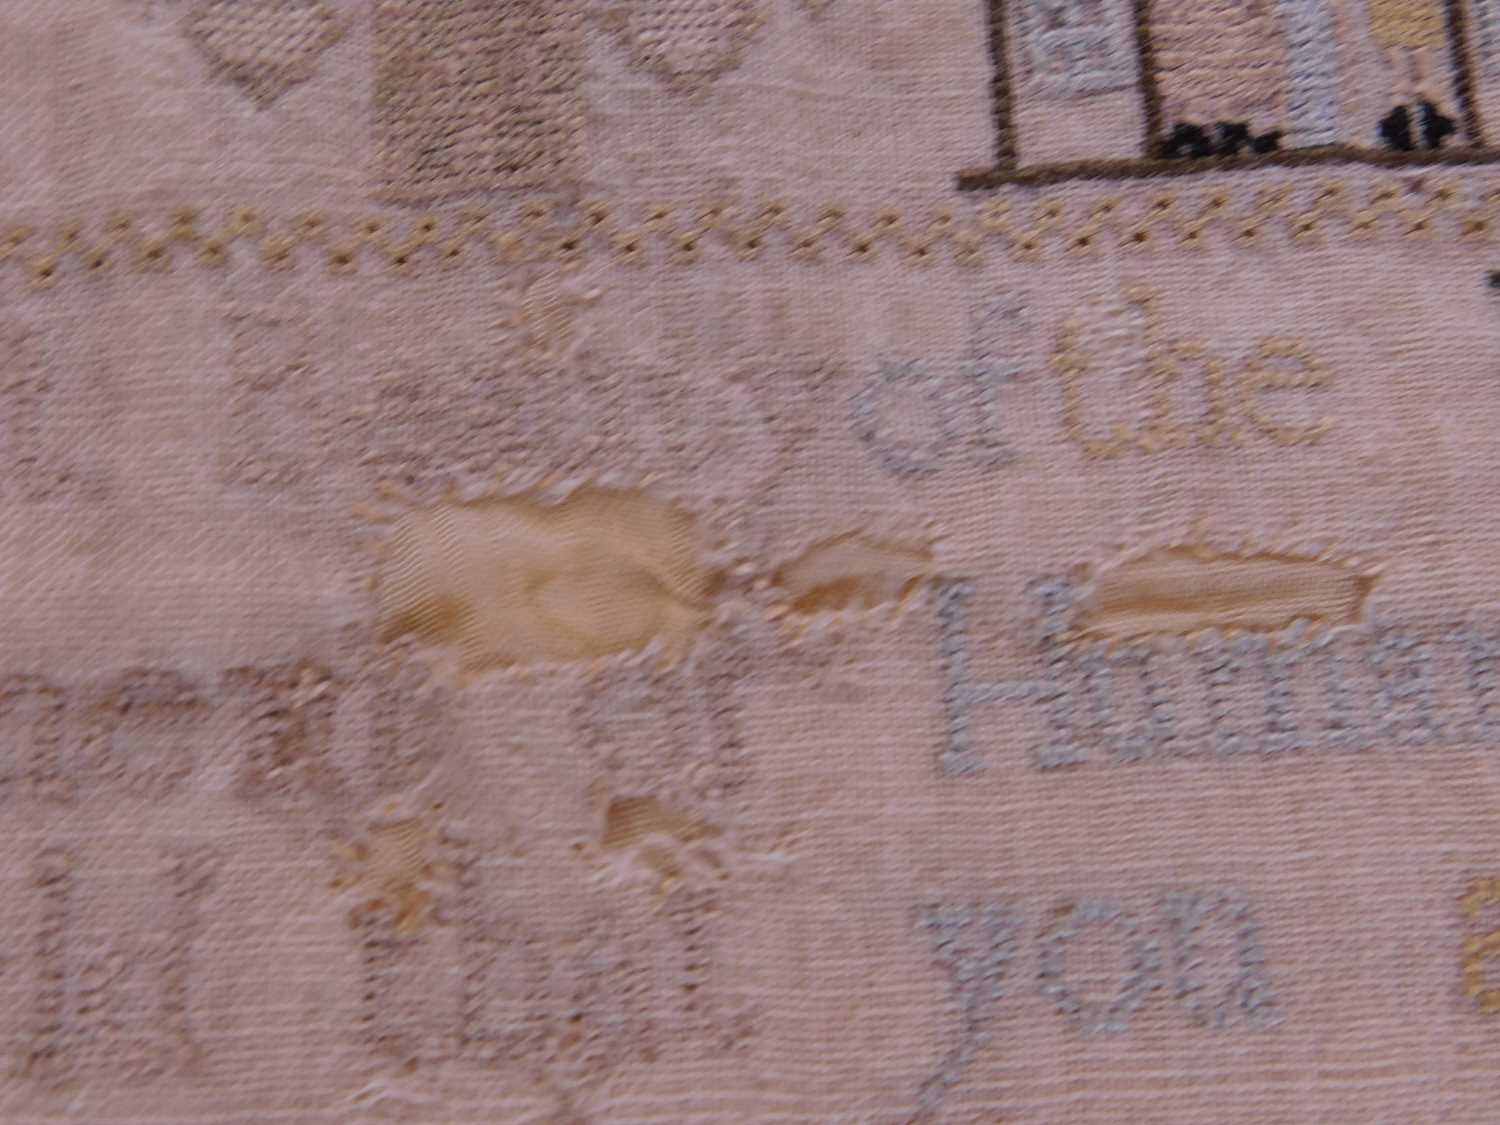 A Georgian needlework sampler, with rows of religious text, animals and buildings, named 'Ann - Image 5 of 6